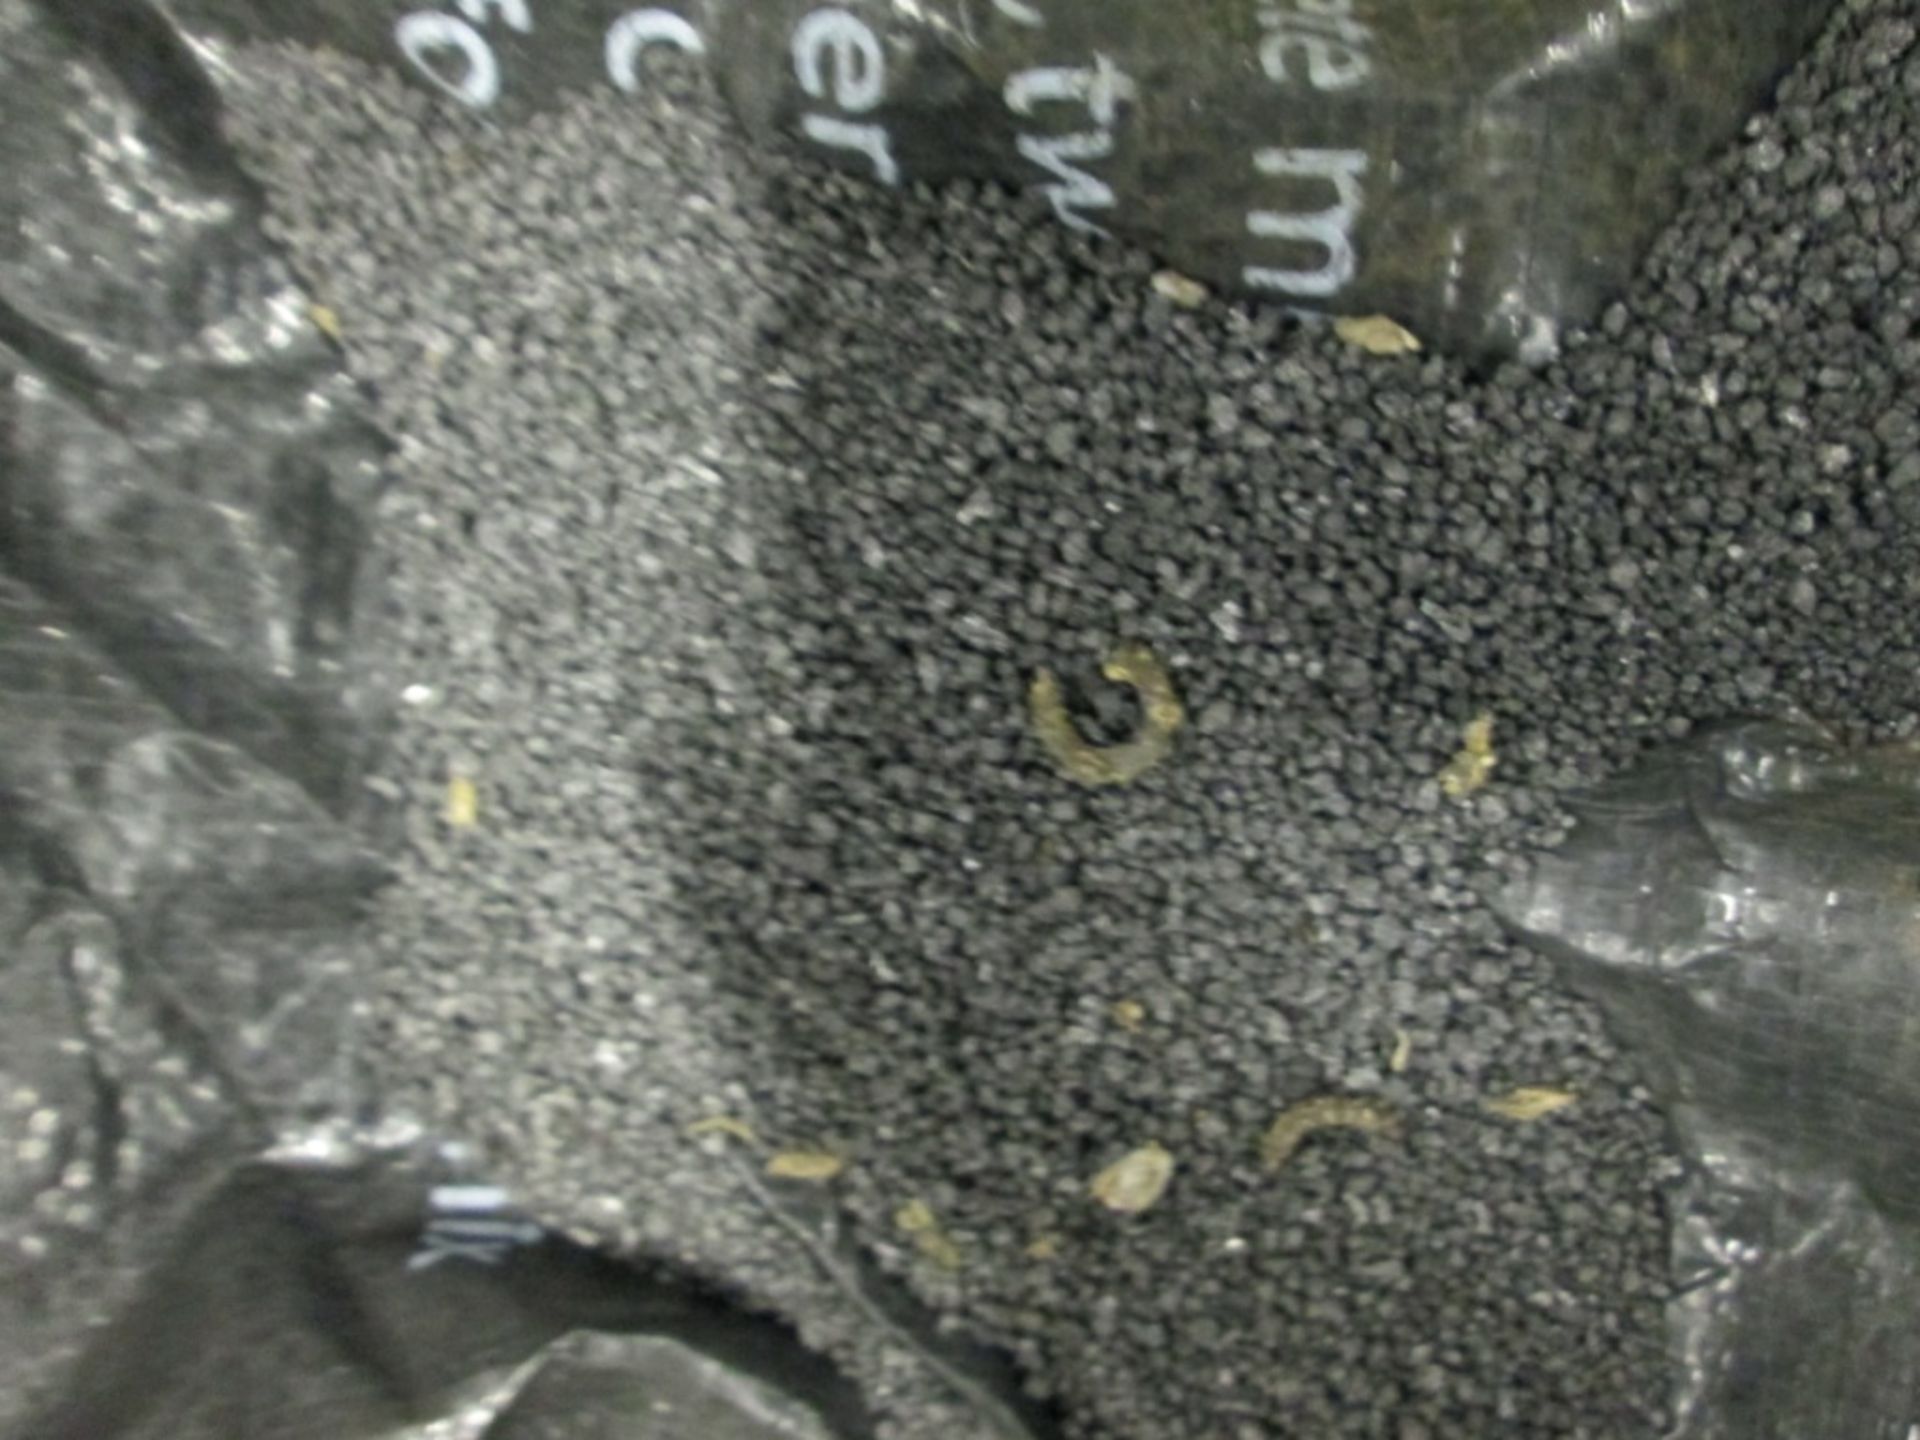 10x Low RES Earthing Compound - Image 3 of 3